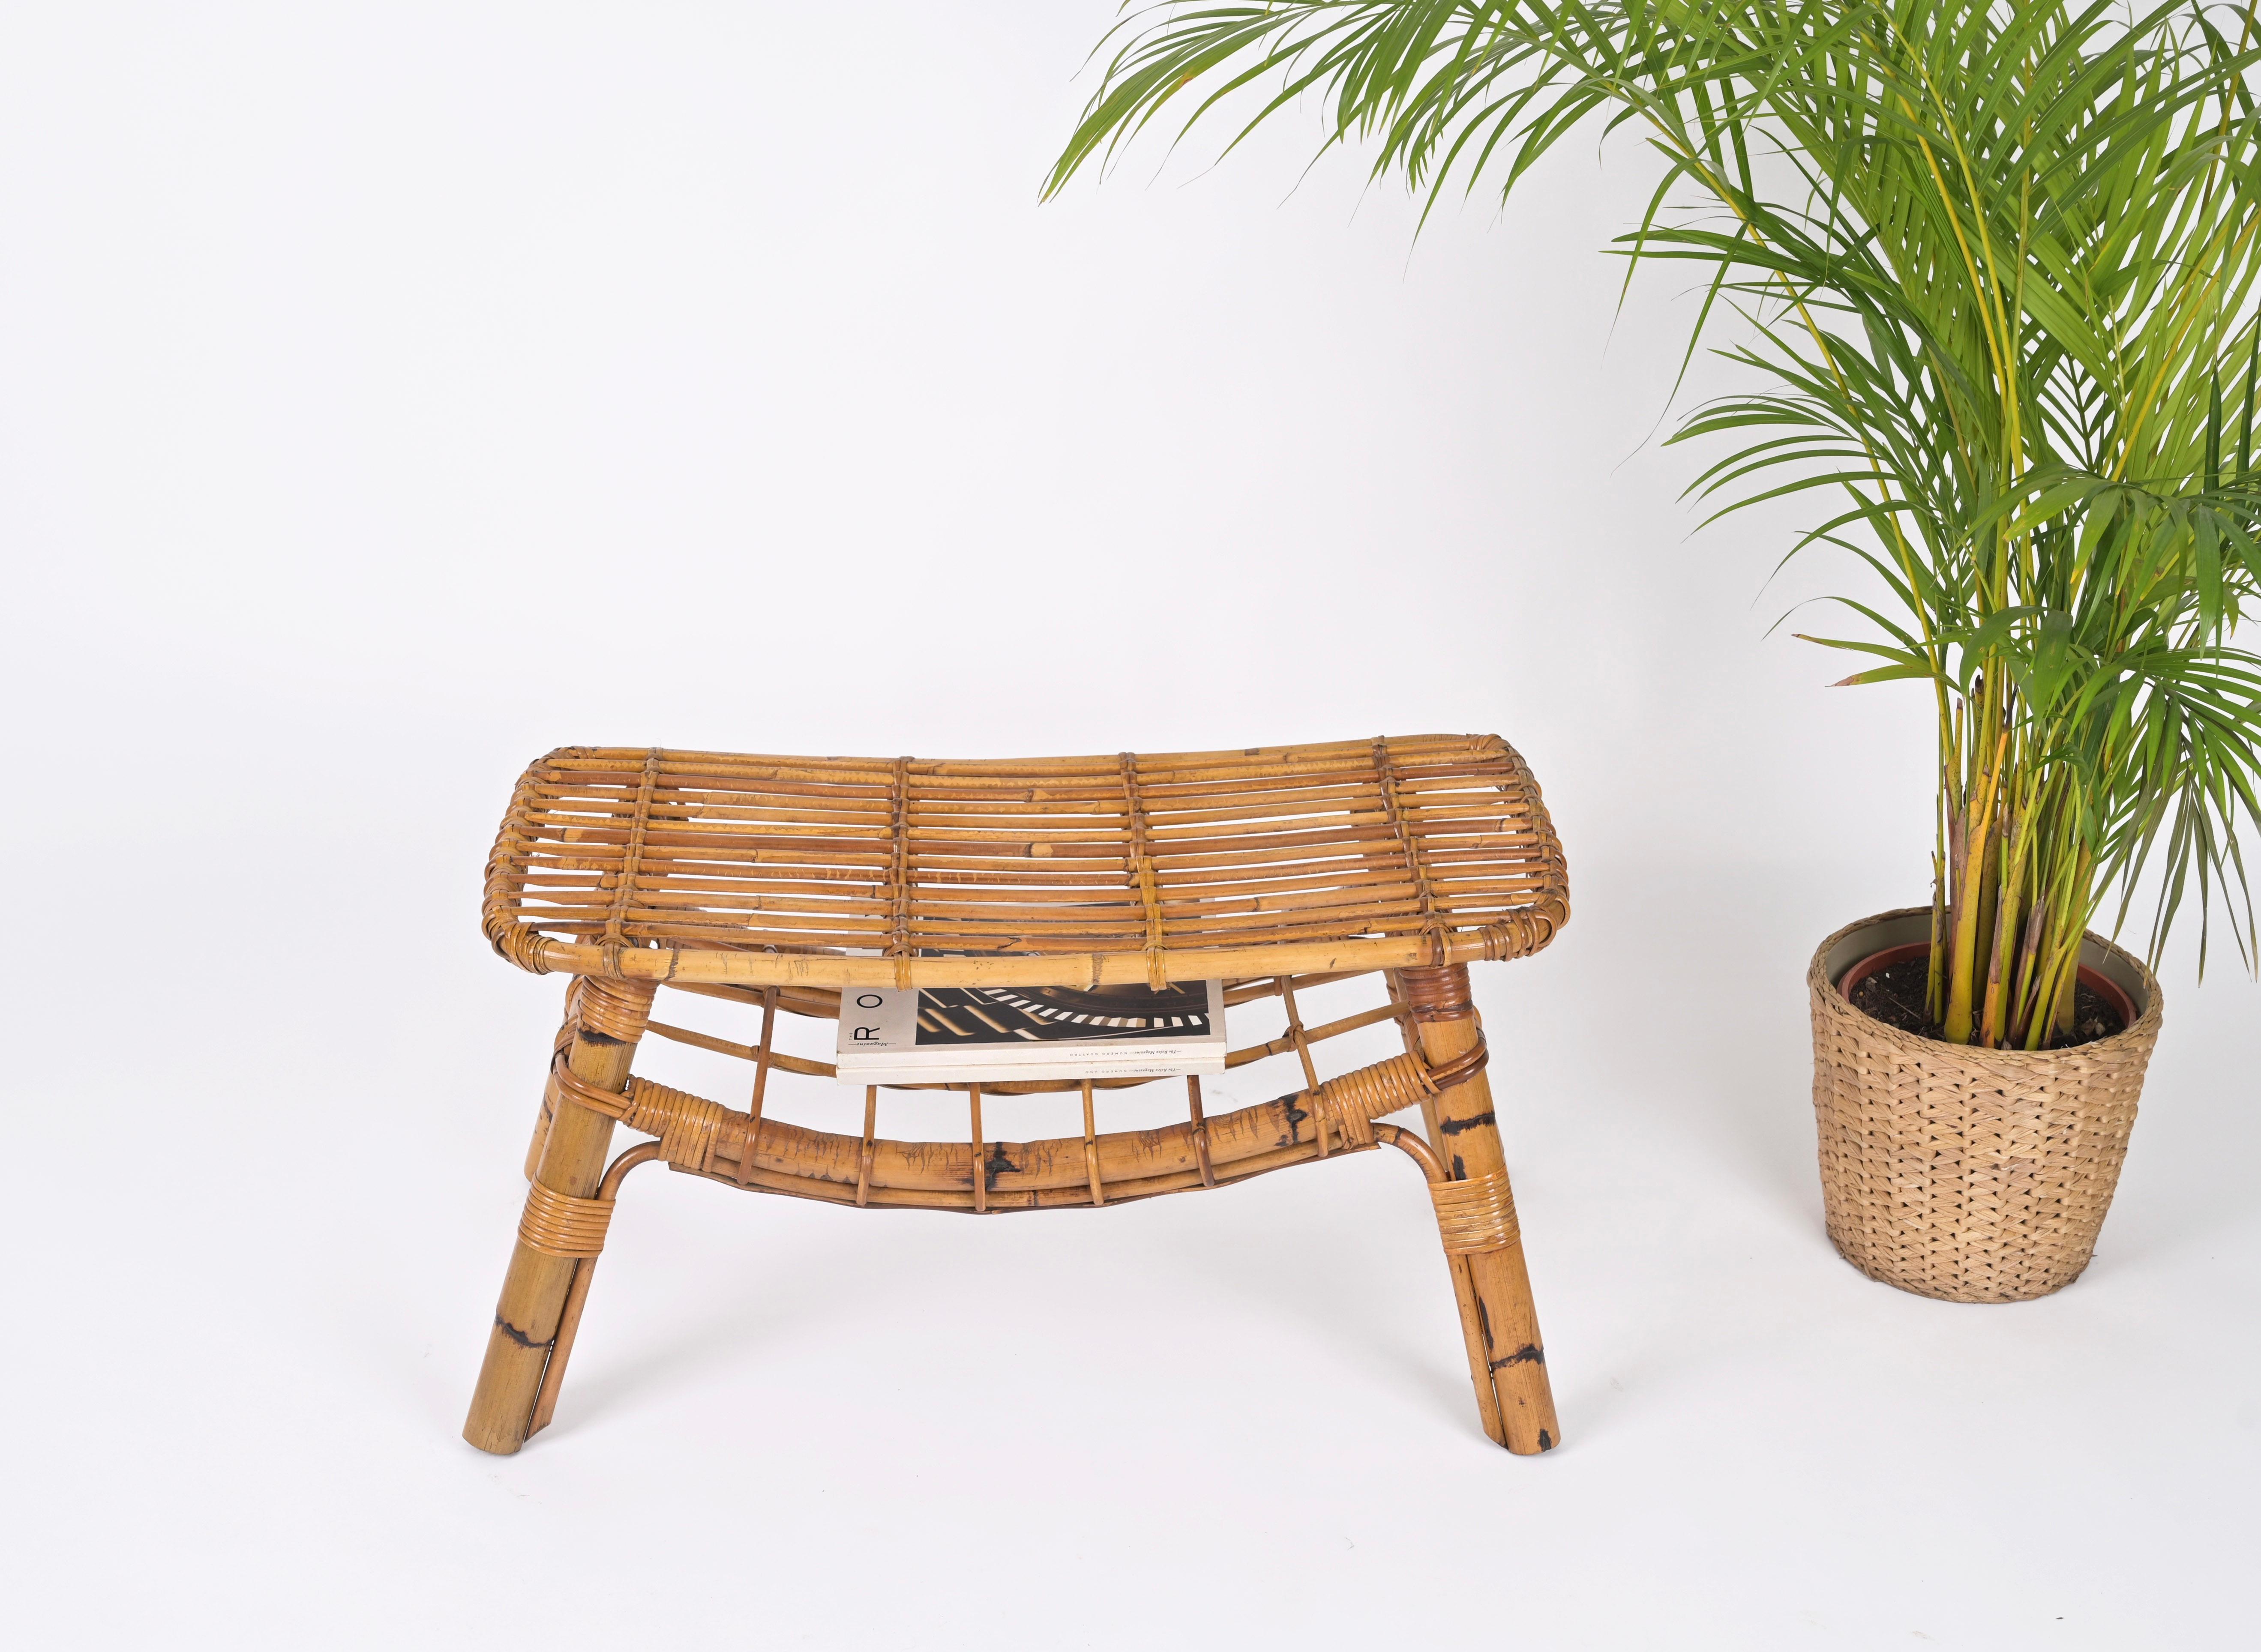 Gorgeous midcentury Italian organic coffee table or bench with in bamboo, rattan and hand-woven wicker. This gorgeous French Riviera style coffee table was designed in Italy during the 1960s and is attributed to Tito Agnoli. 

This versatile object